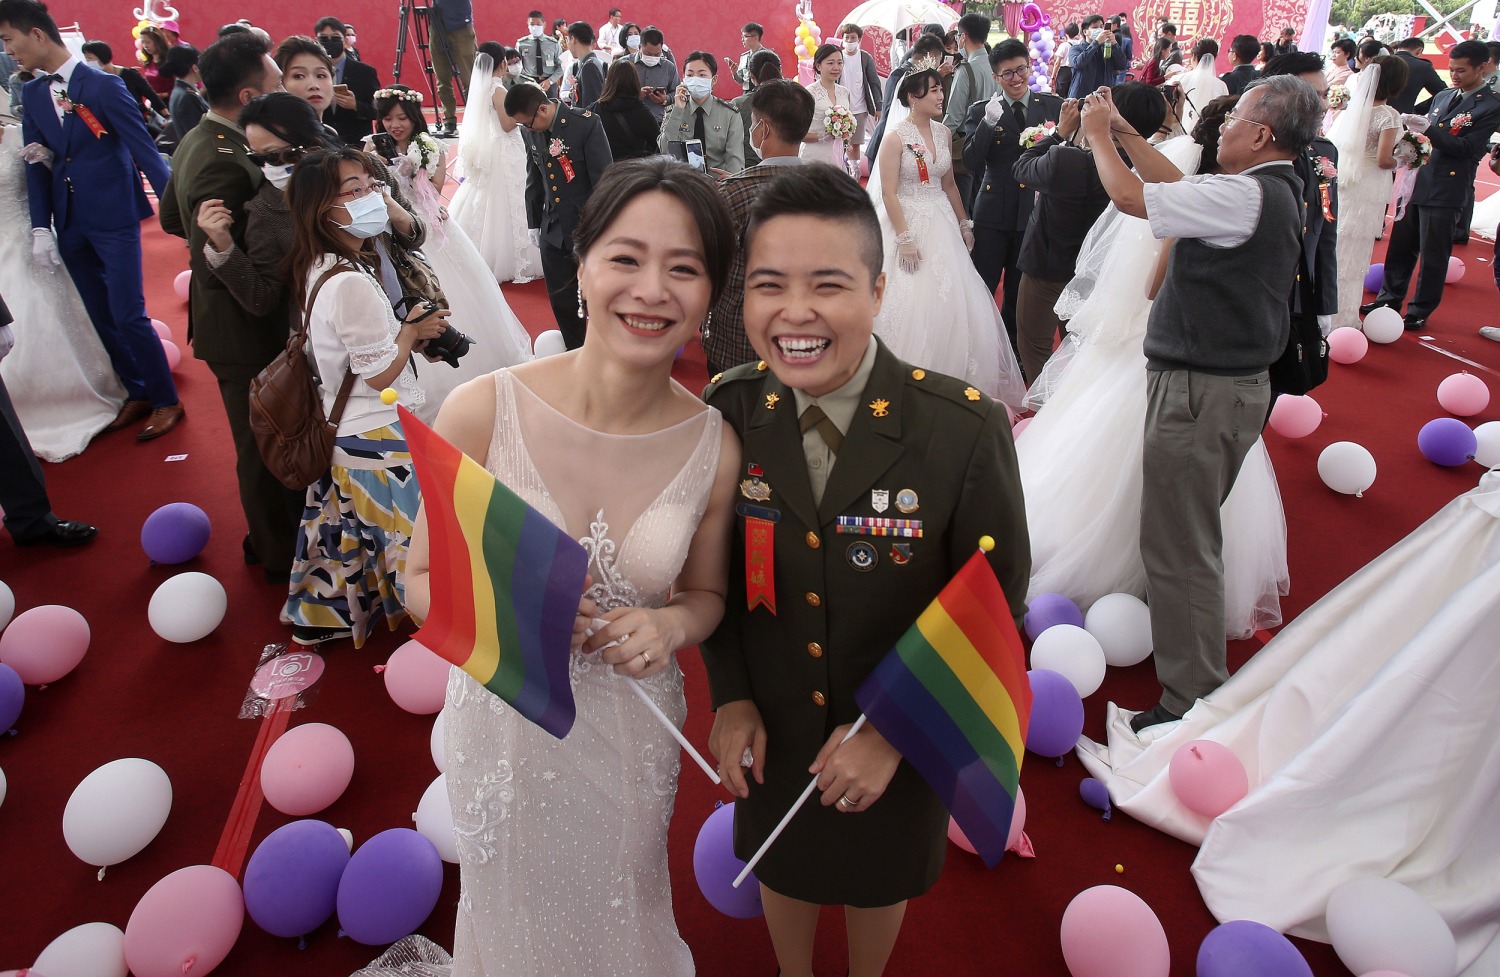 Two lesbian couples marry in mass wedding held by Taiwans military picture